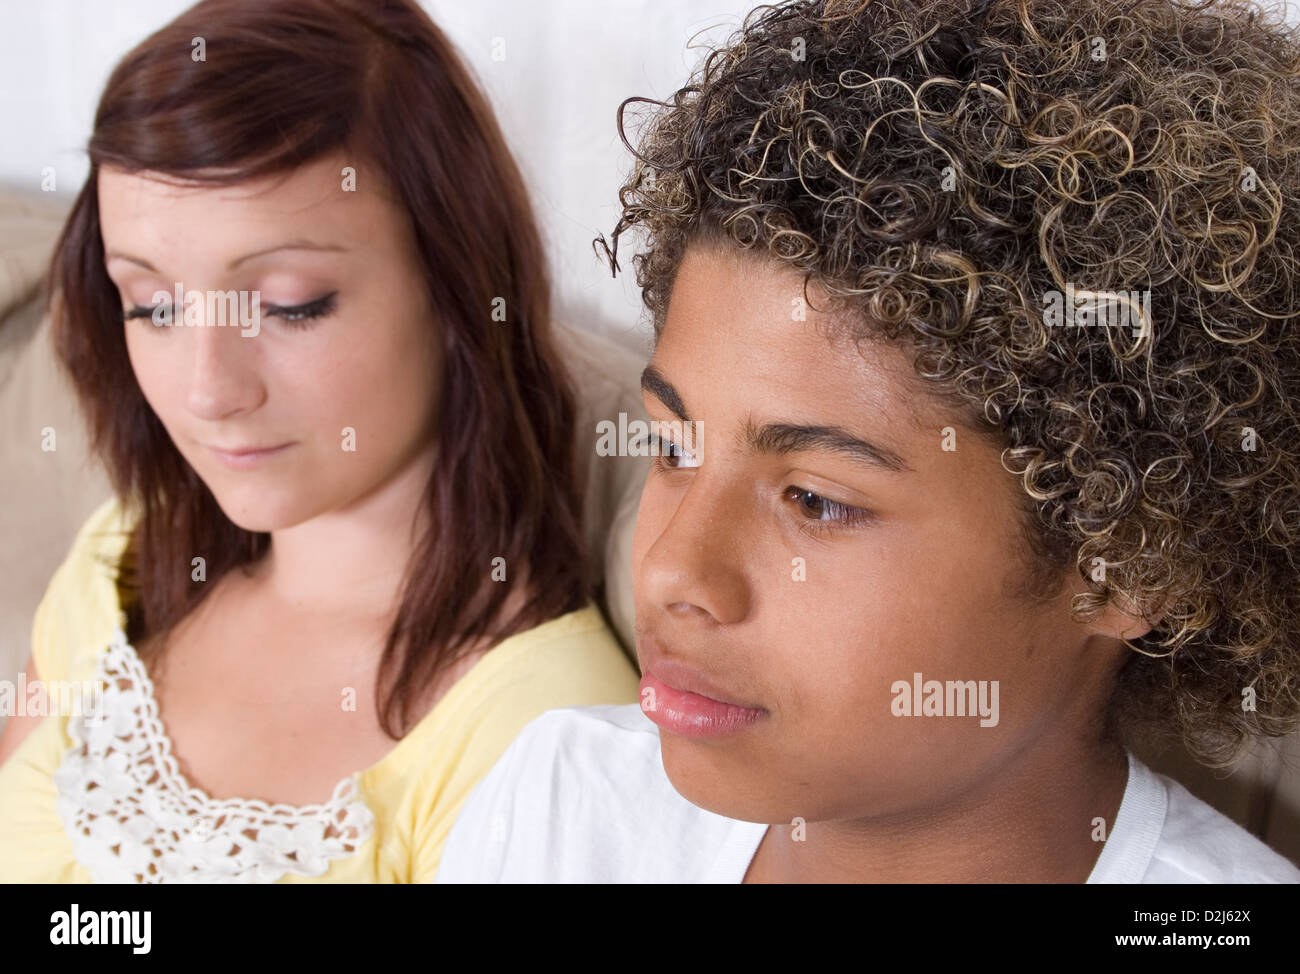 teenage boy and girl having an argument Stock Photo